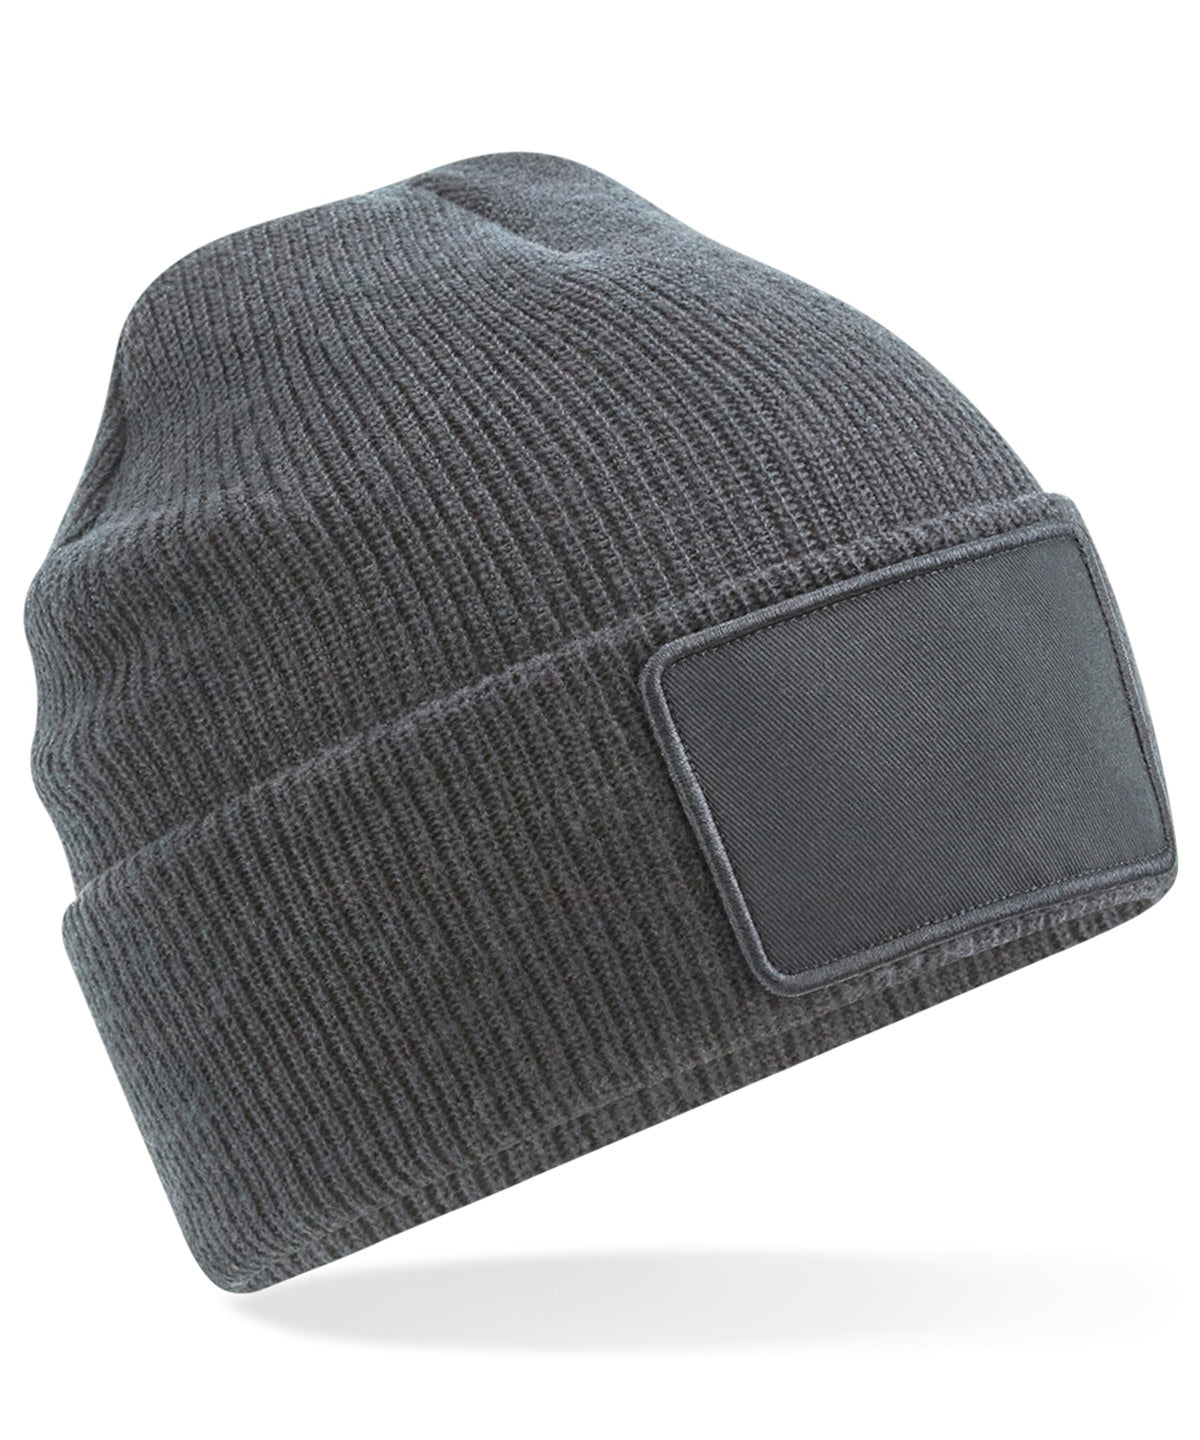 Personalised Hats - Dark Grey Beechfield Removable patch Thinsulate™ beanie